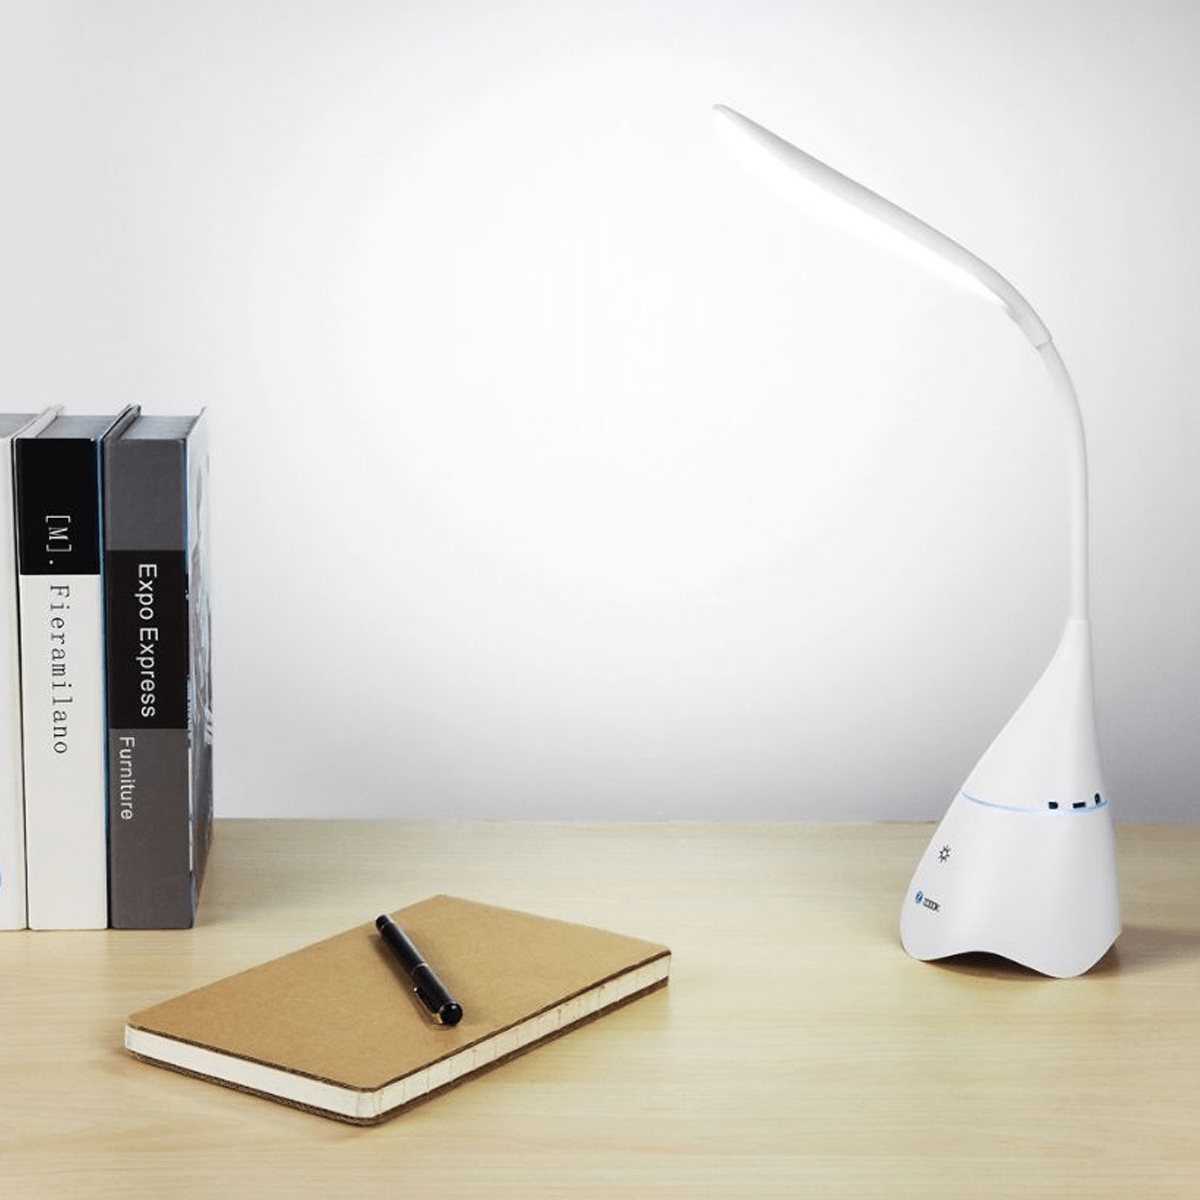 Zoook Dazzler Wireless Bluetooth Speaker with LED Desk Lamp - White